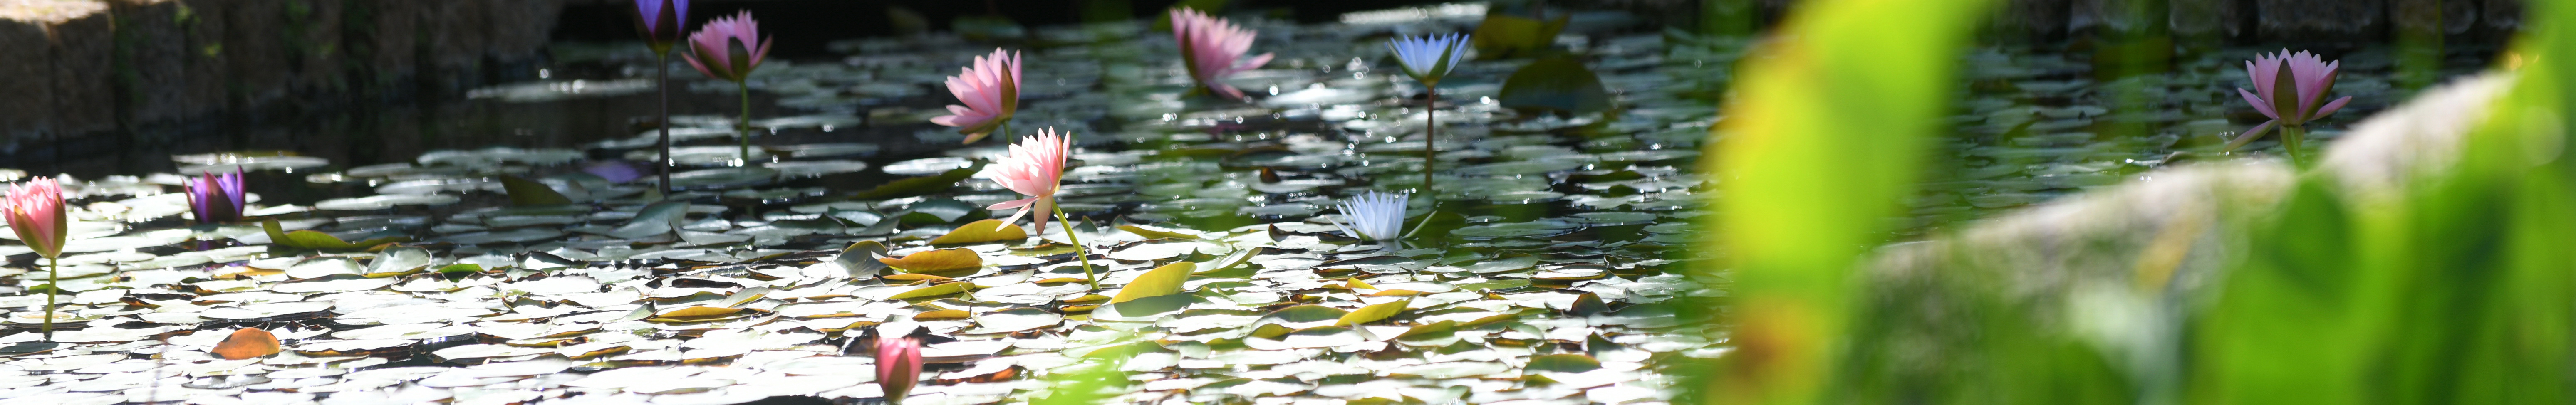 Water lilies on Stone